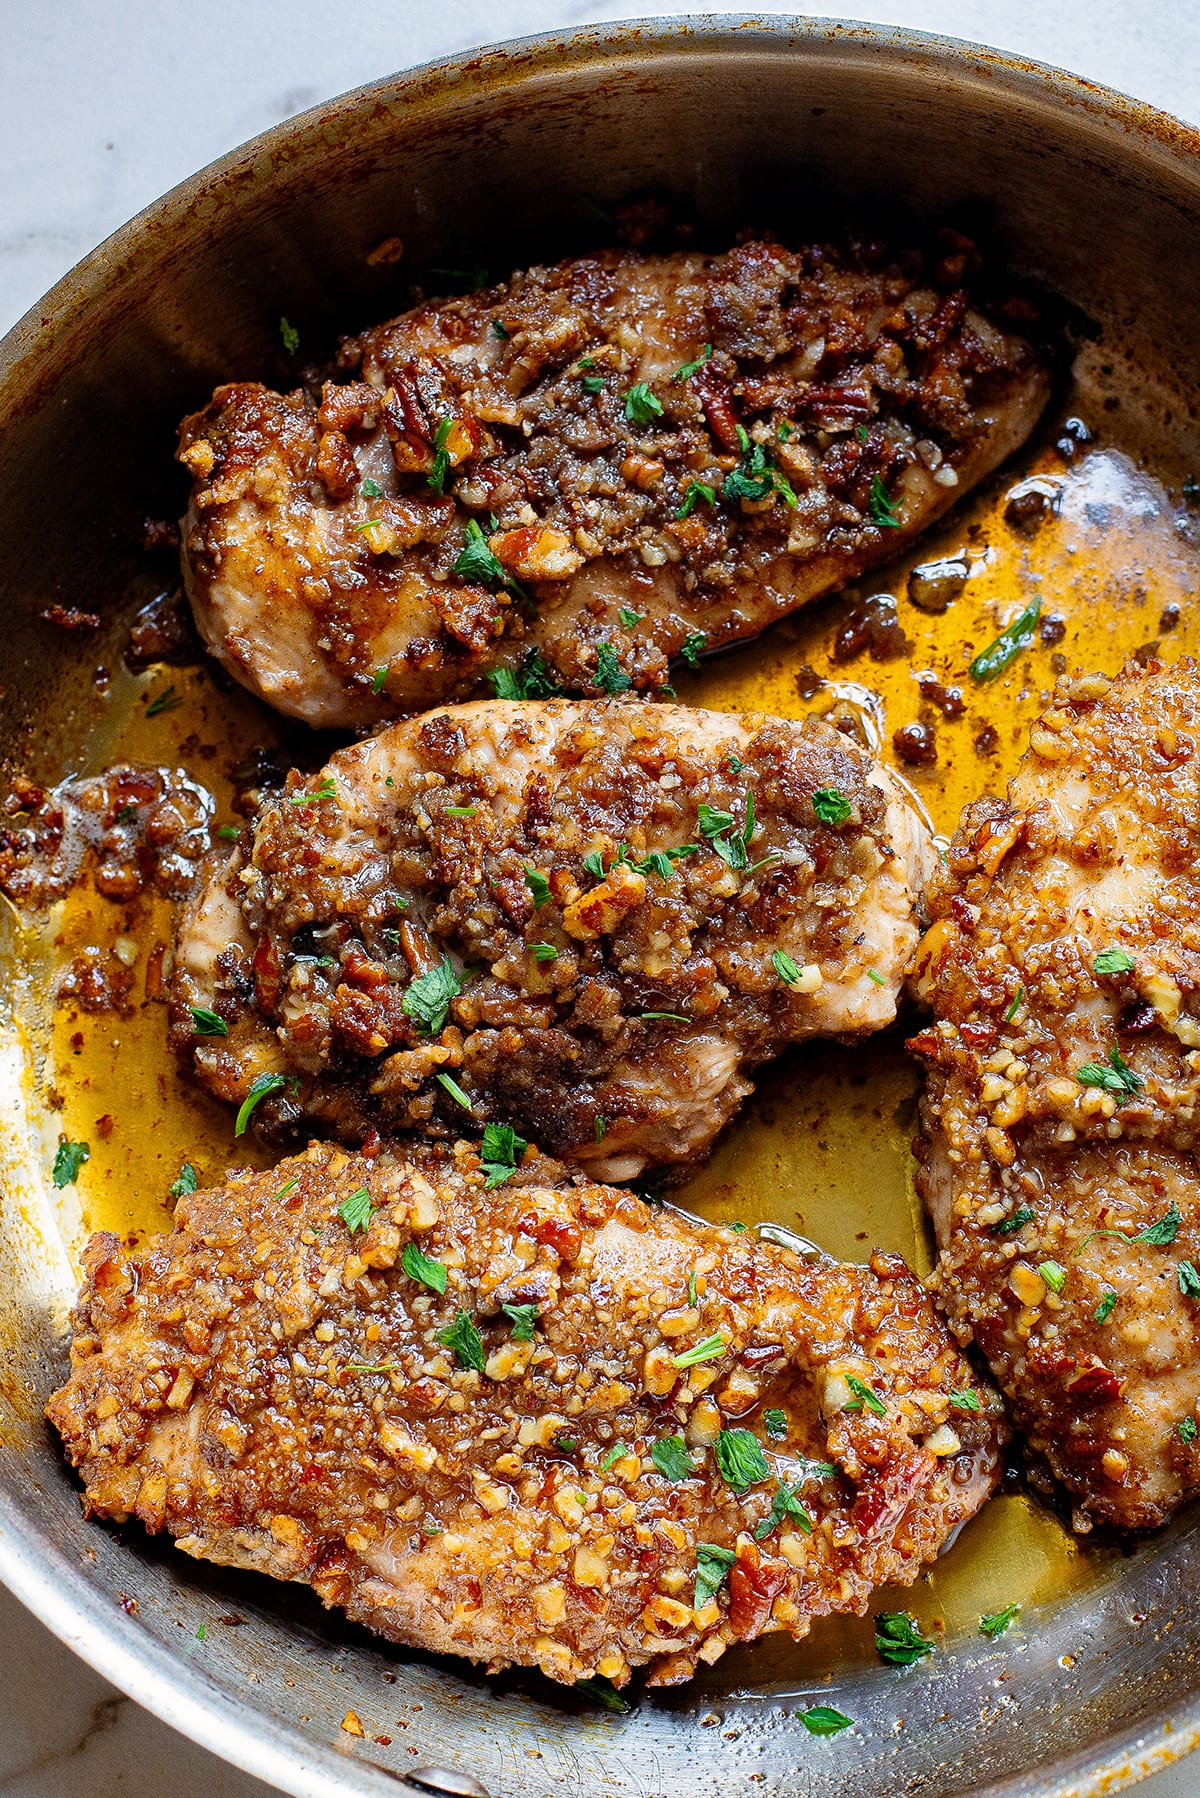 Pecan crusted chicken recipe with honey and garlic